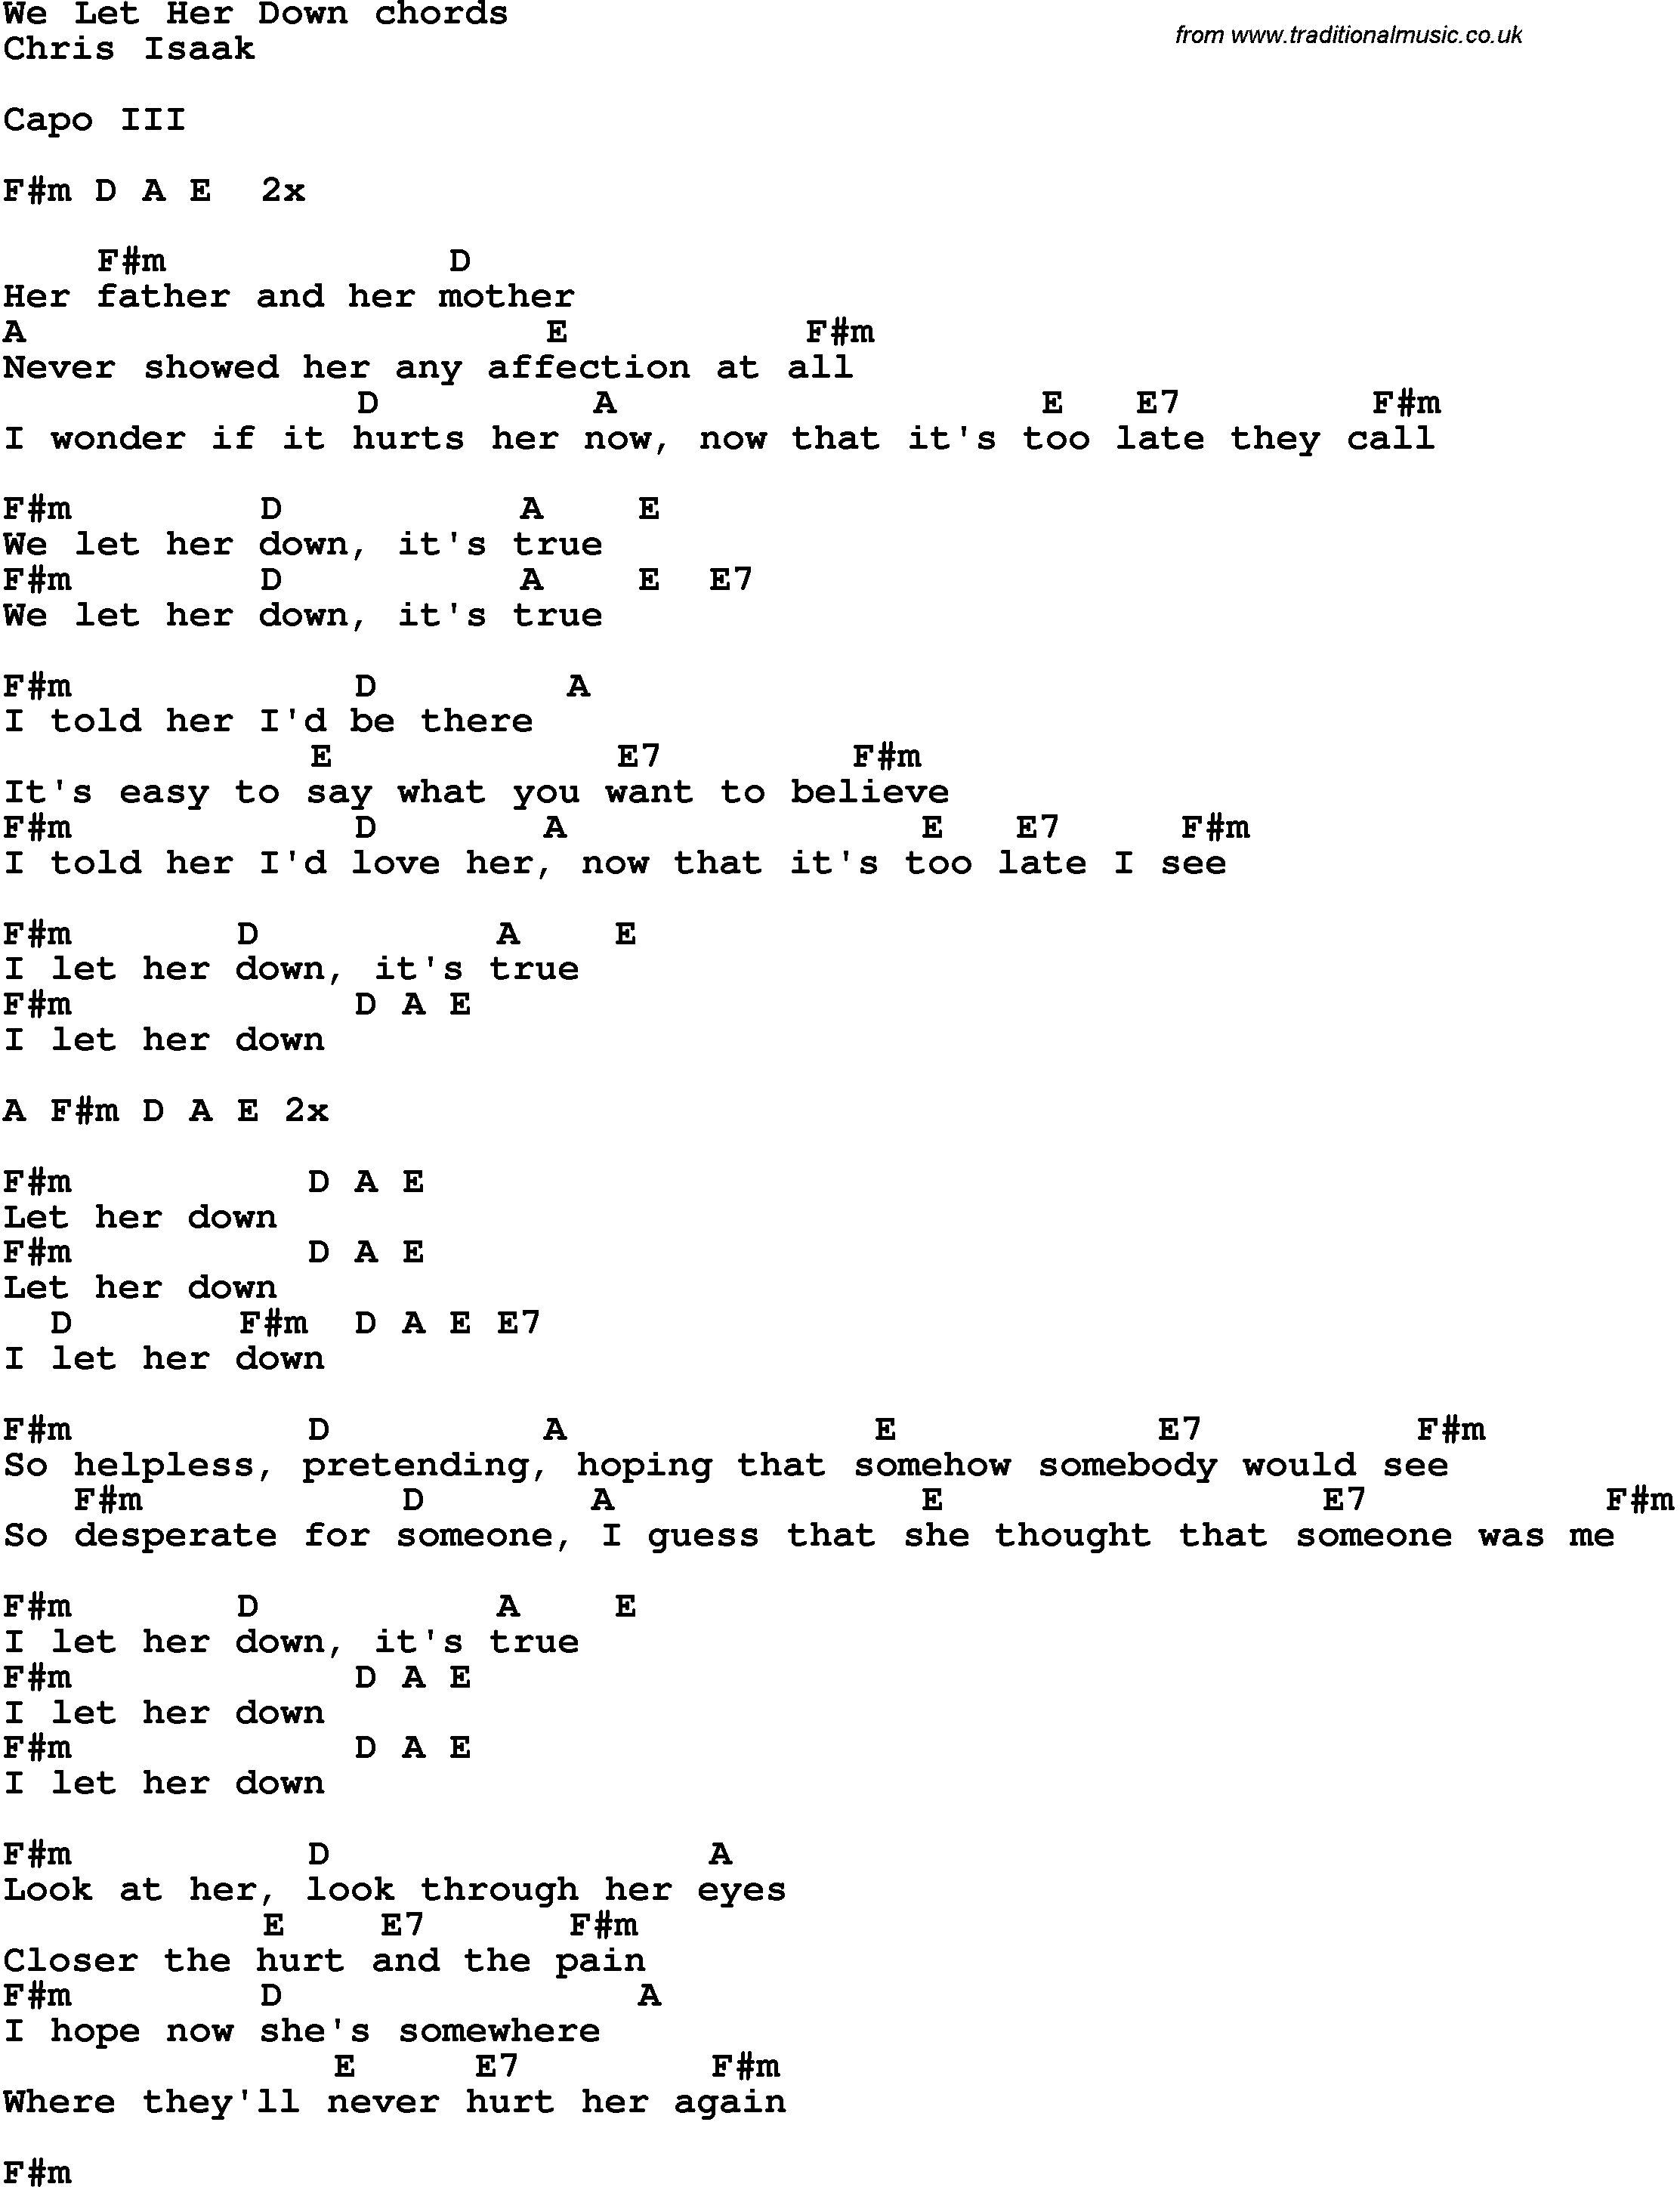 Song Lyrics with guitar chords for We Let Her Down